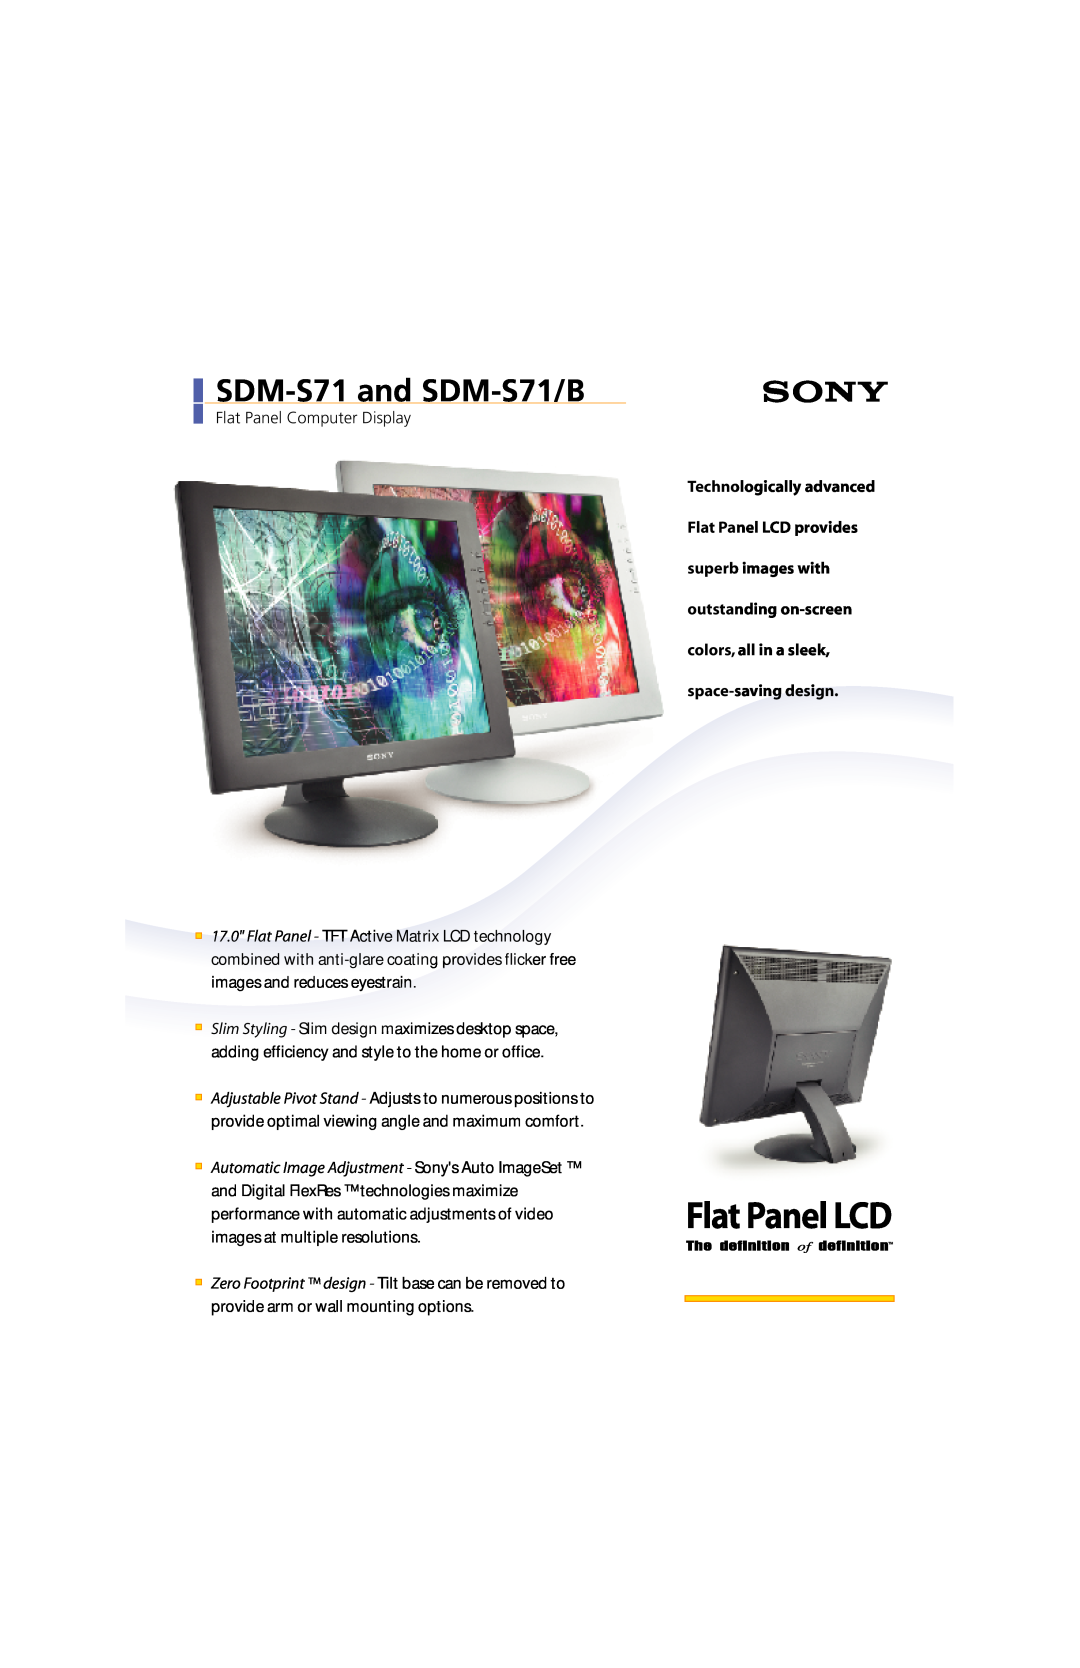 Sony manual SDM-S71 and SDM-S71/B, Technologically advanced Flat Panel LCD provides superb images with 